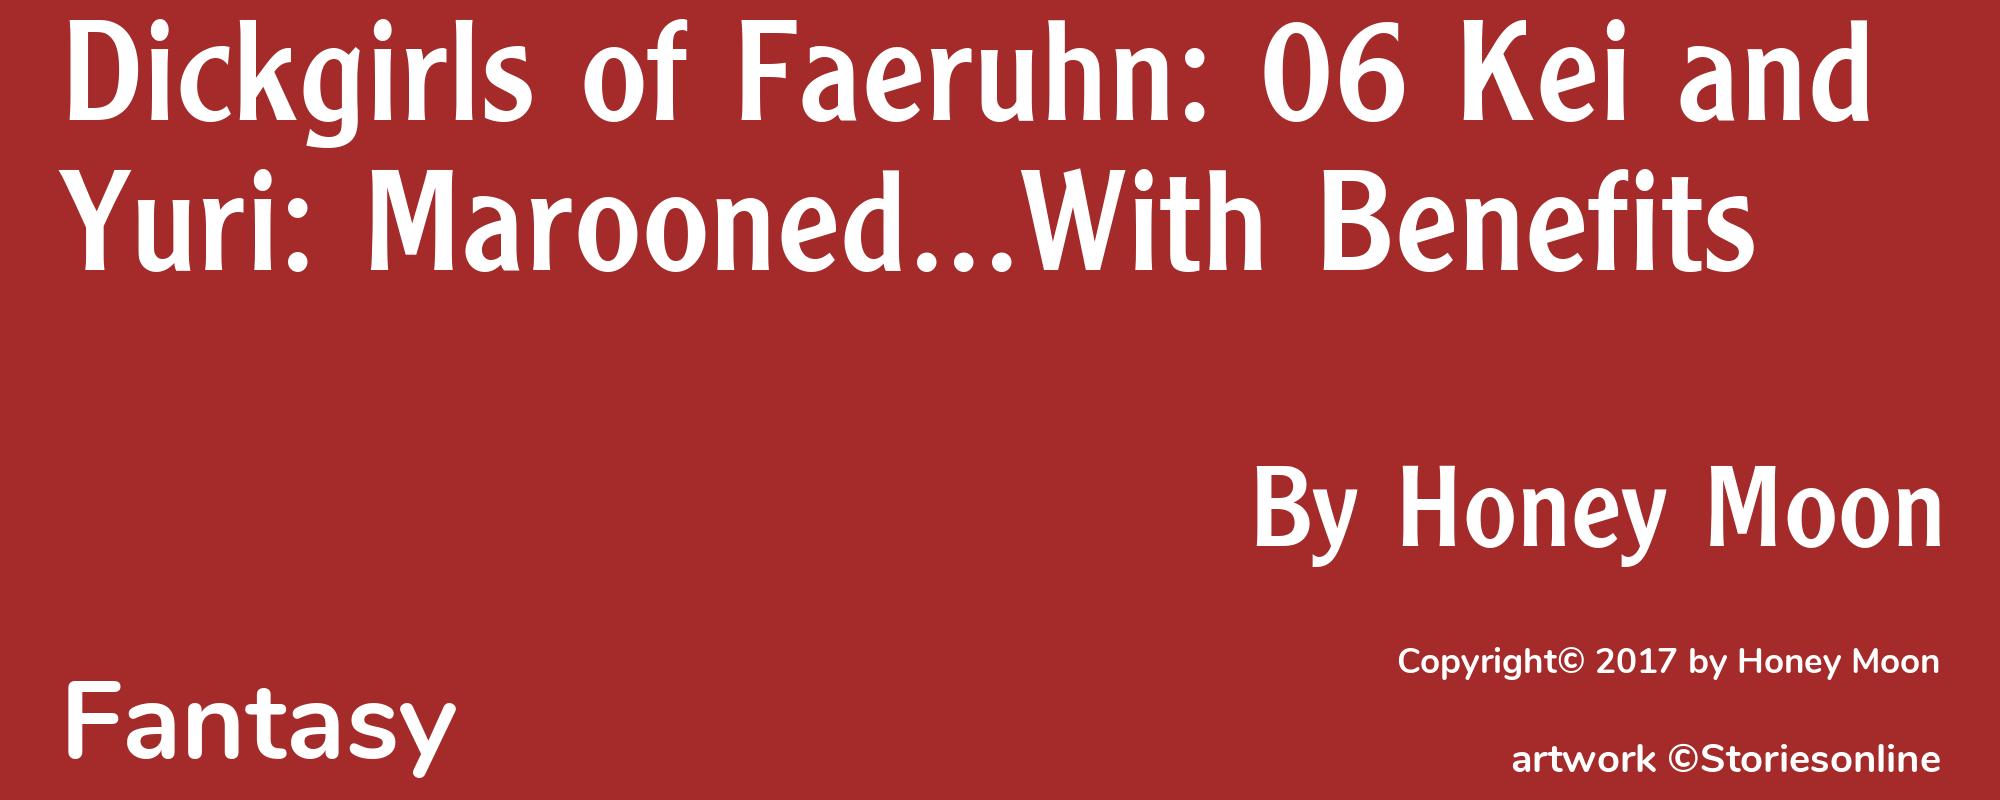 Dickgirls of Faeruhn: 06 Kei and Yuri: Marooned...With Benefits - Cover